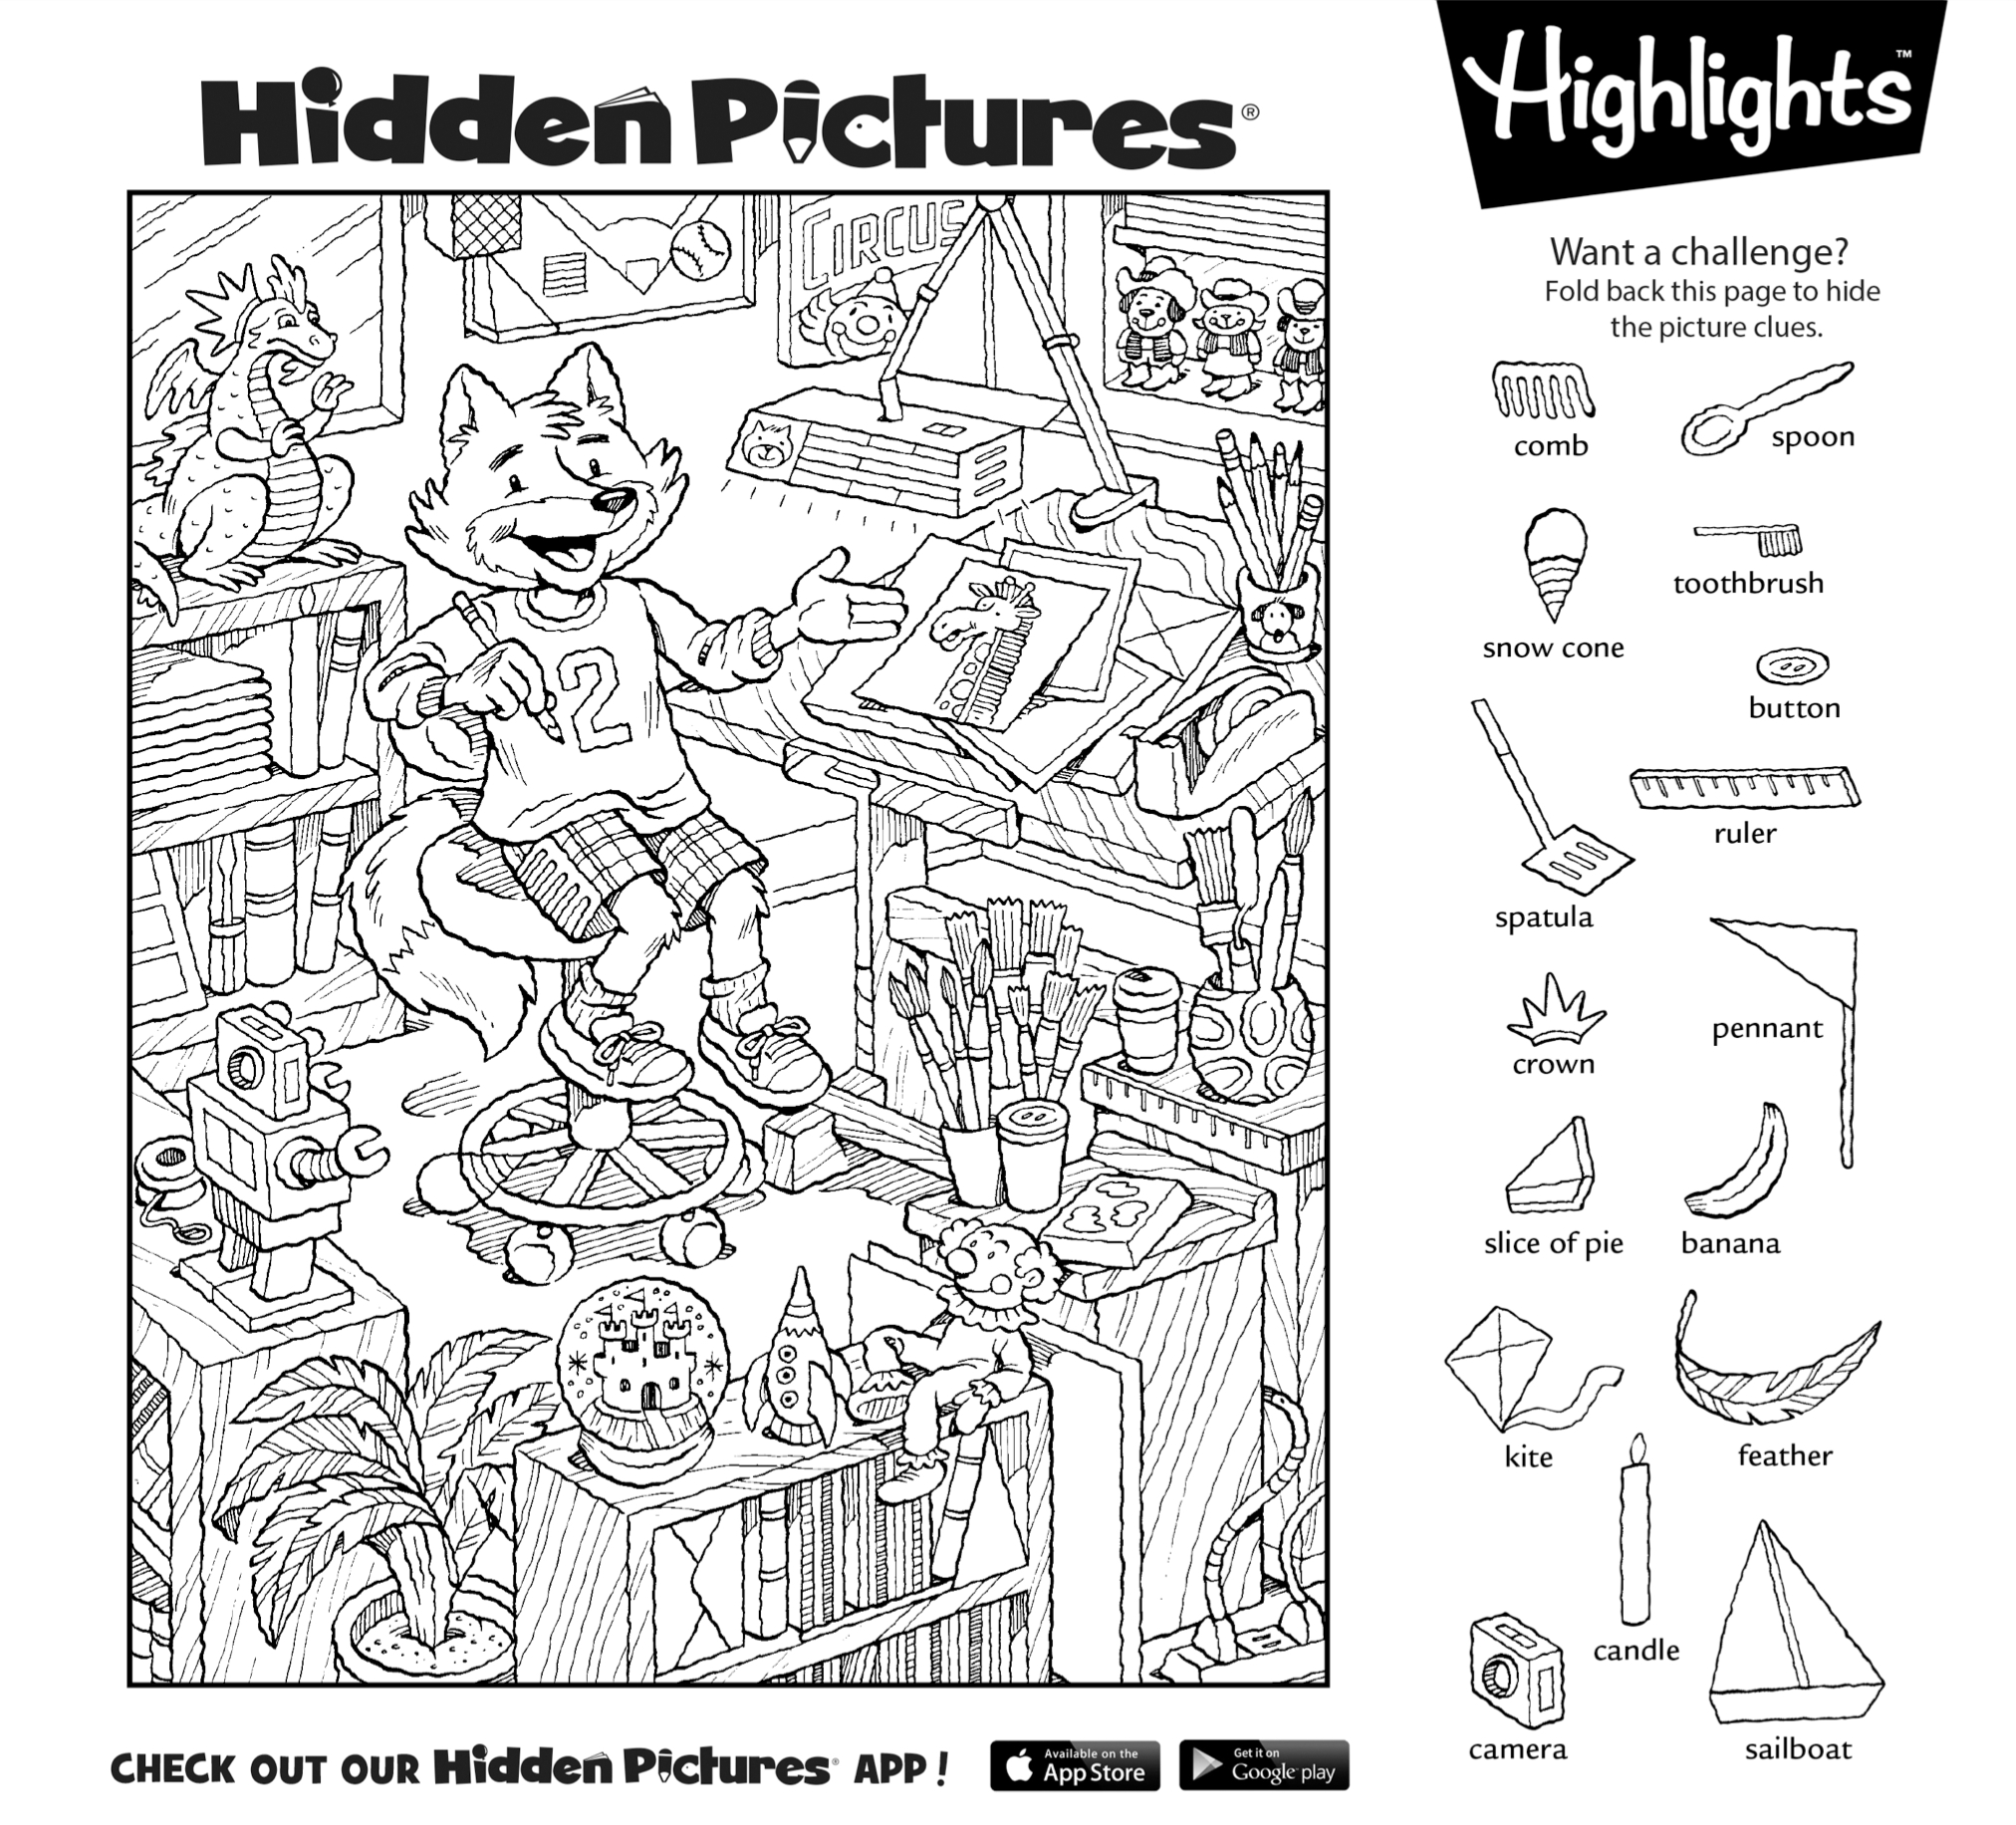 Download This Free Printable Hidden Pictures Puzzle To Share With - Printable Hidden Puzzles